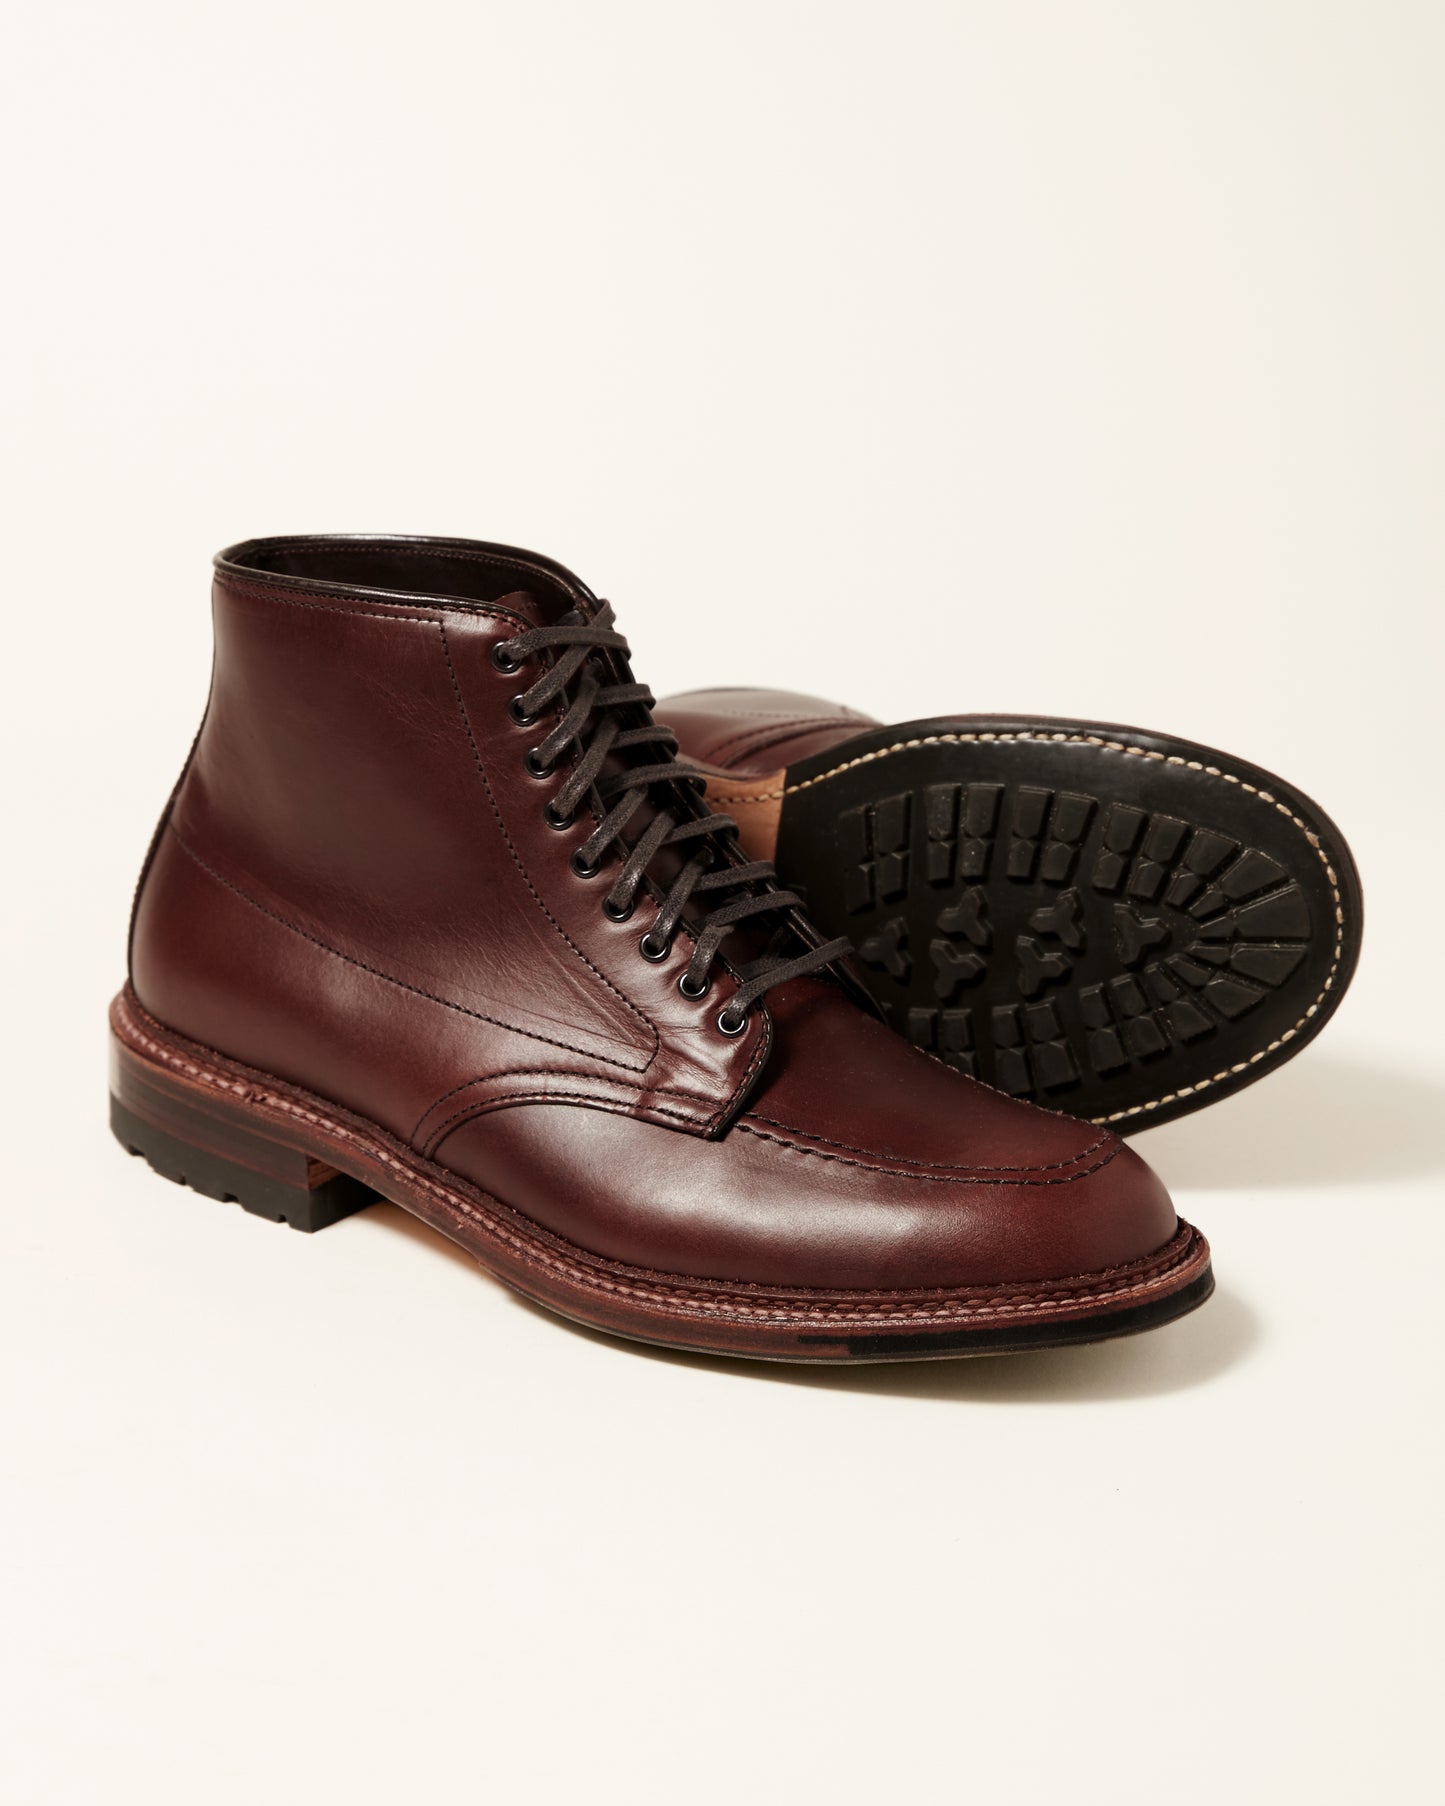 "PAC" Indy Boot in Brown Chromexcel, Trubalance Last